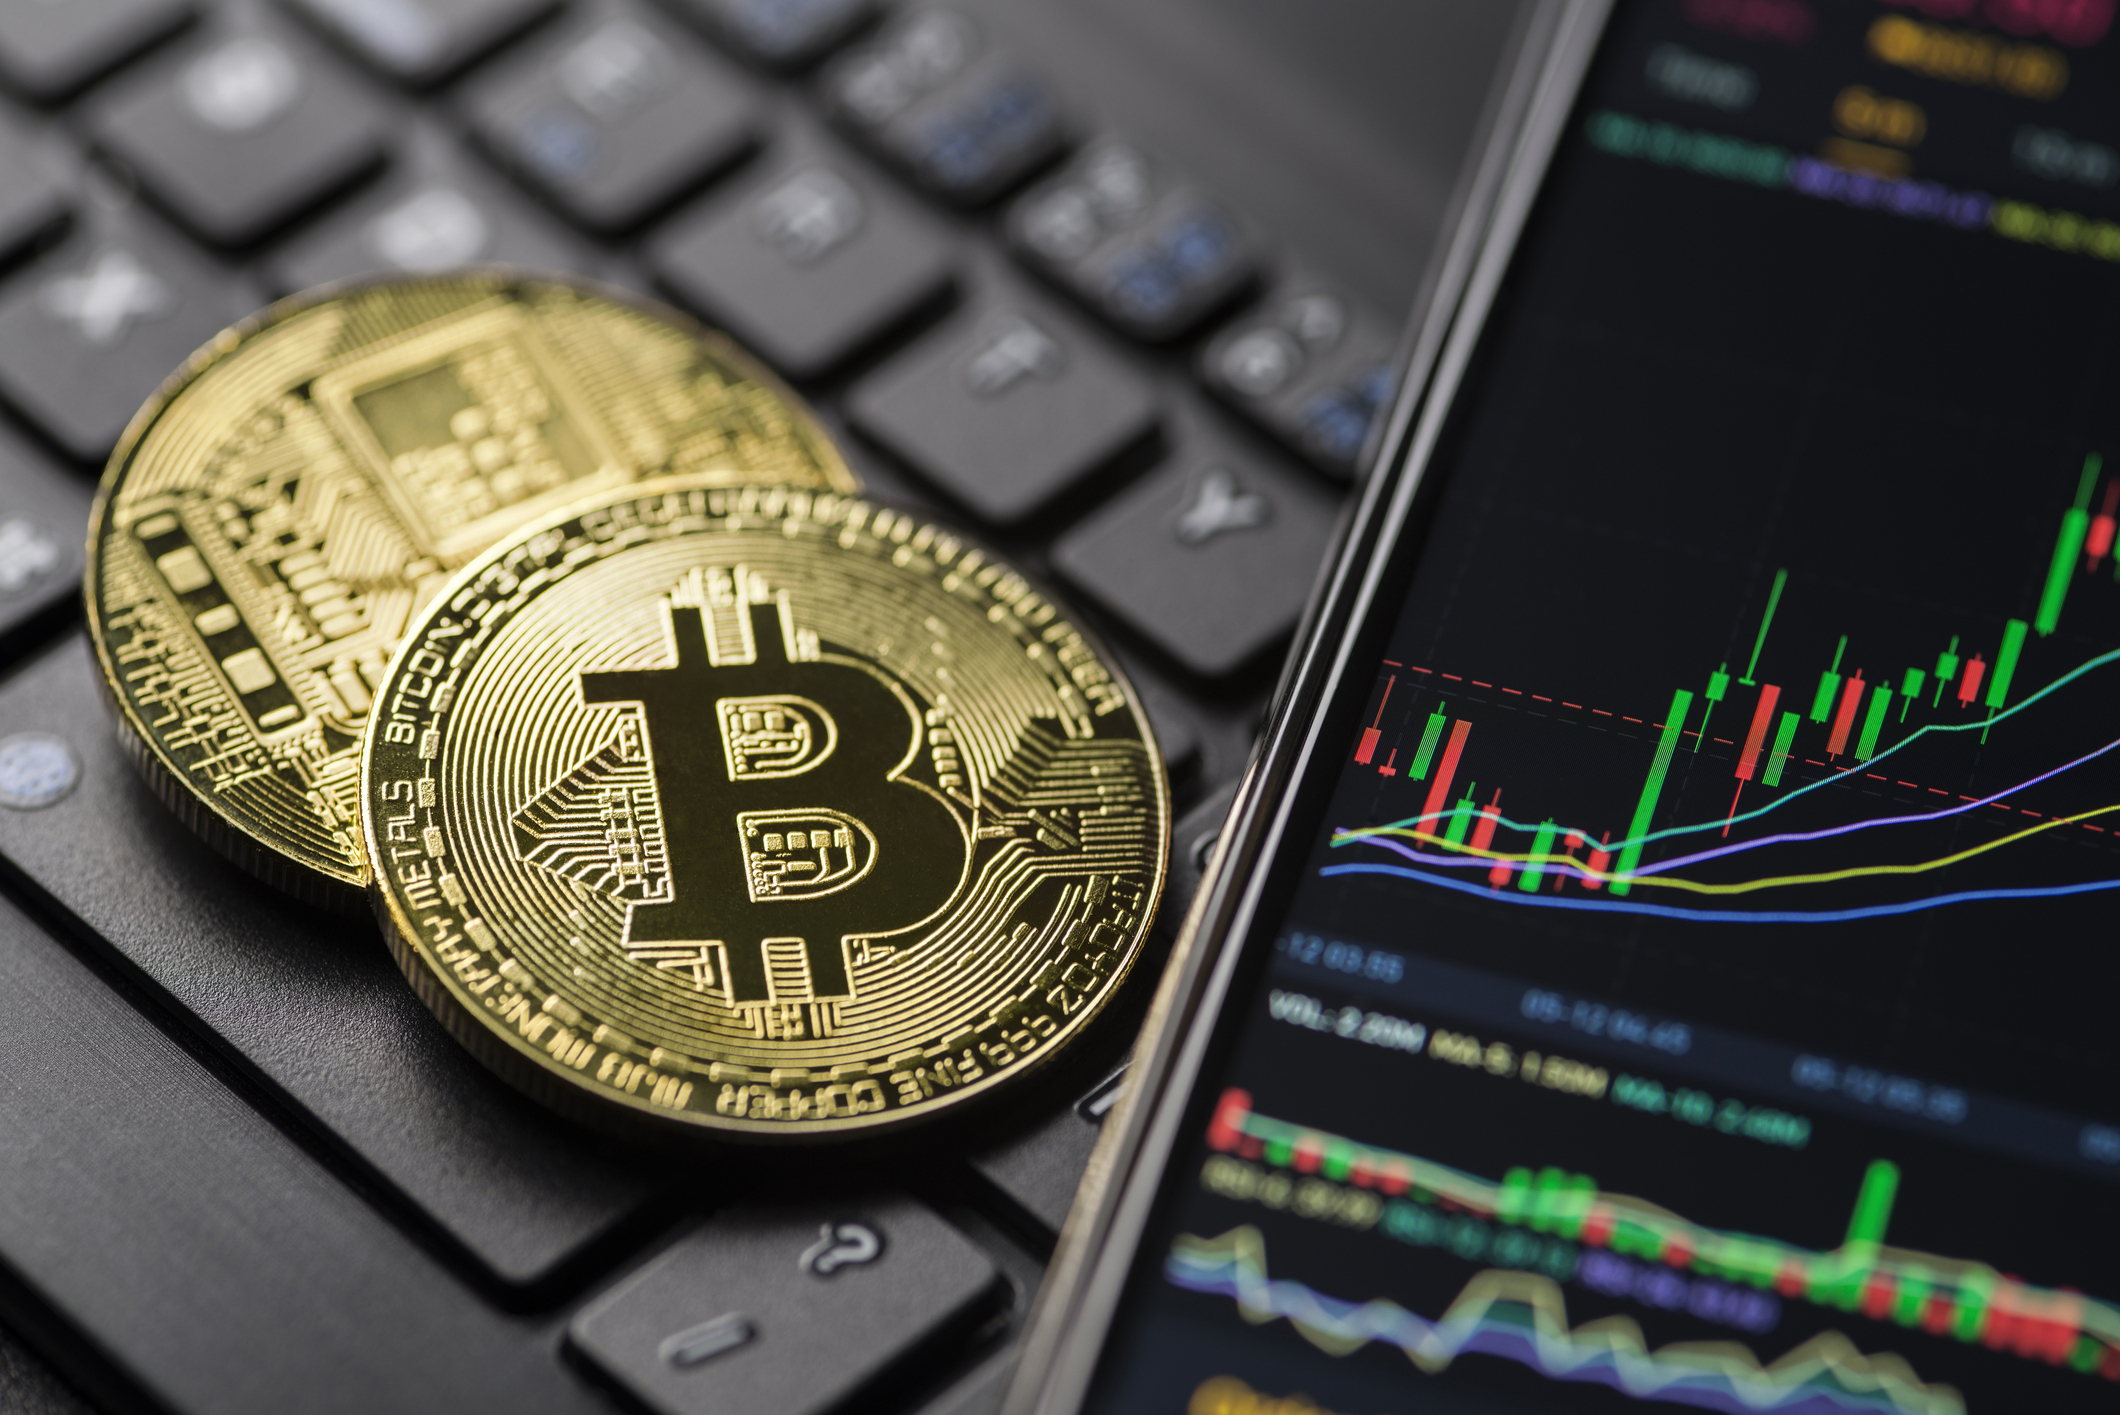 Analyst Predicts Bitcoin Rally To $45,000 Before Pullback